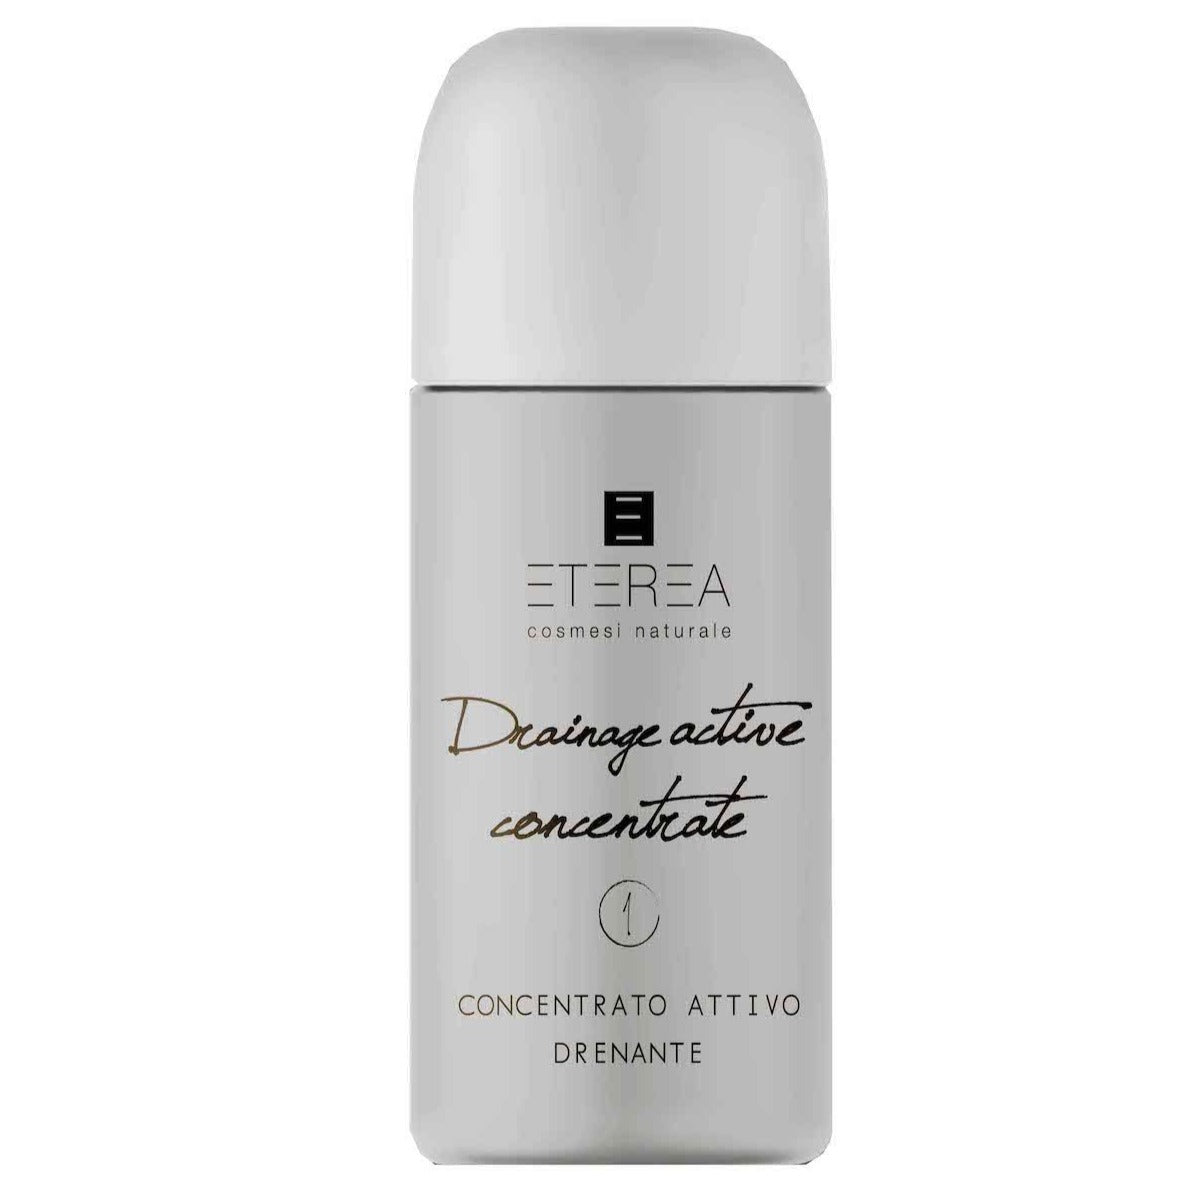 Drainage Active Concentrate Eterea Cosmesi